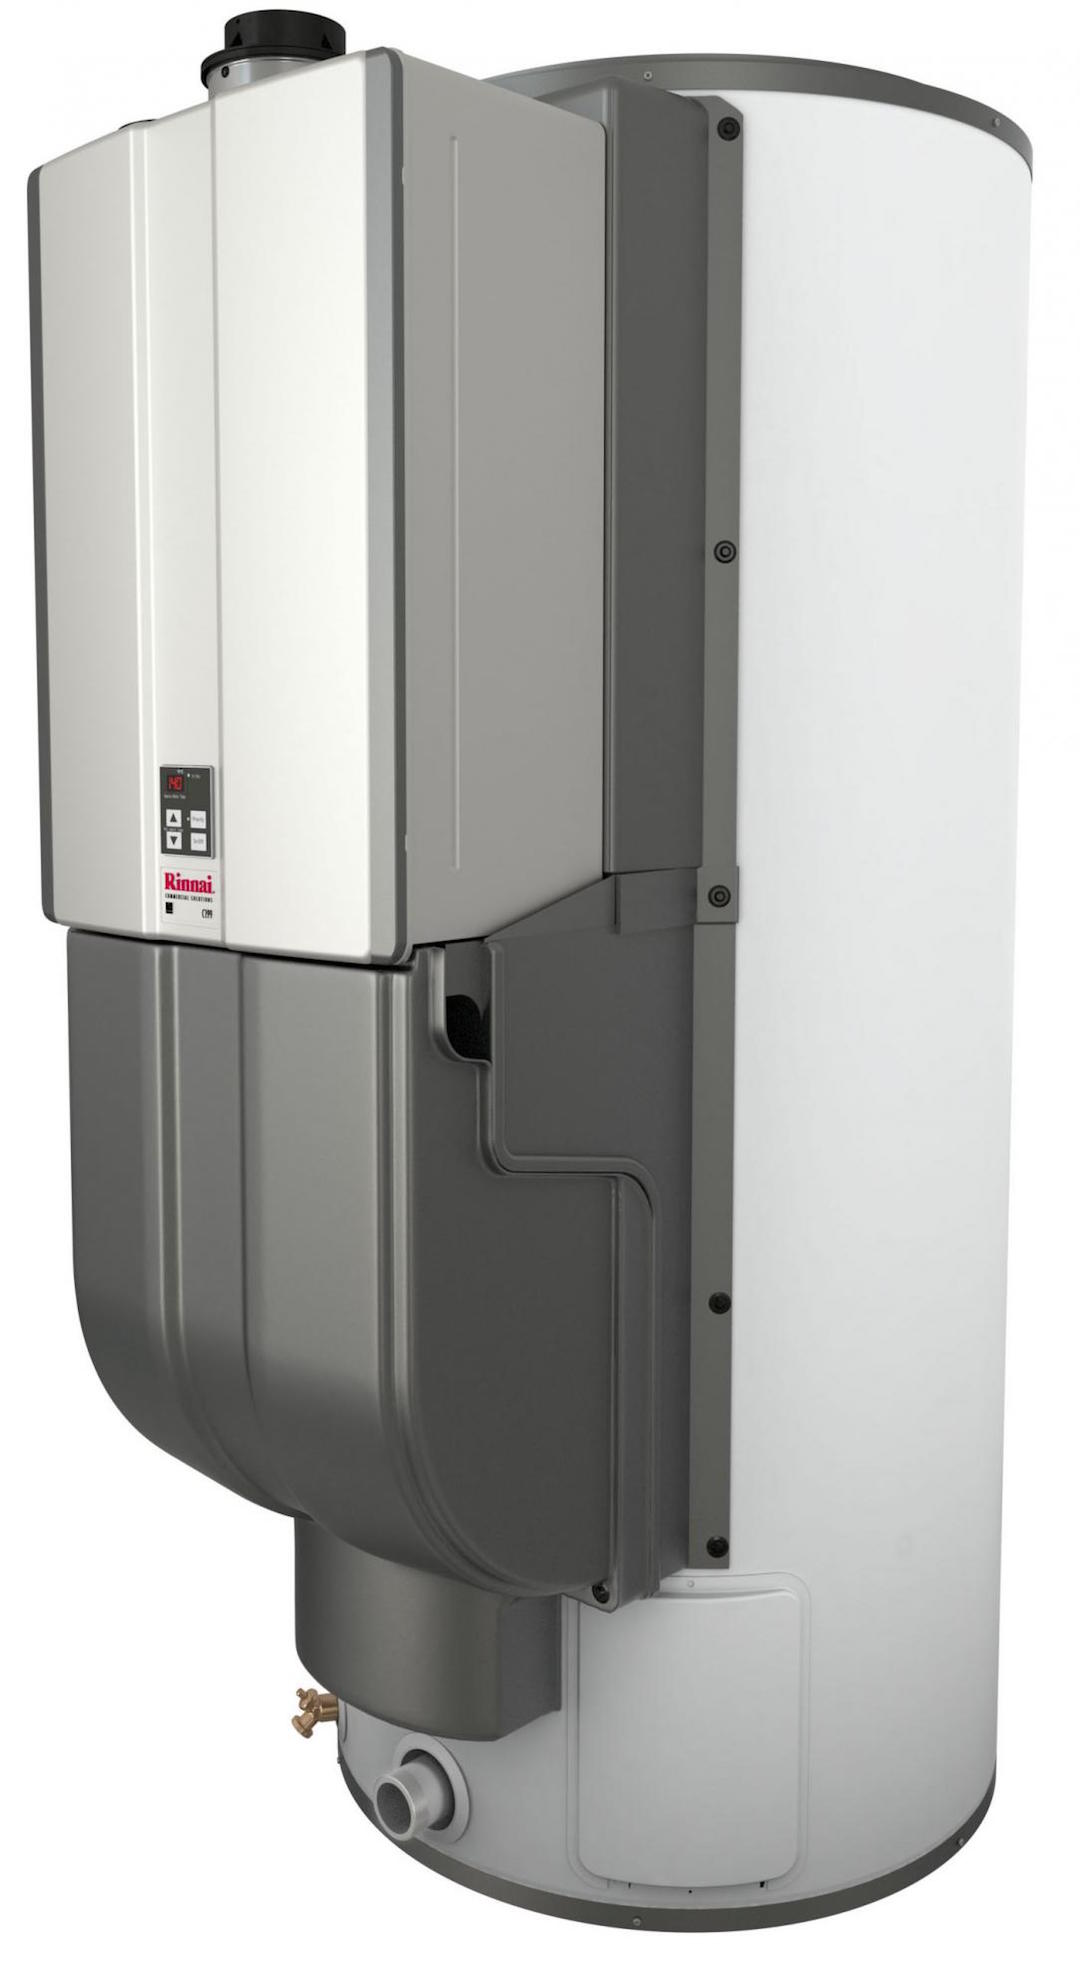 Demand Duo Commercial WATER HEATING SYSTEM